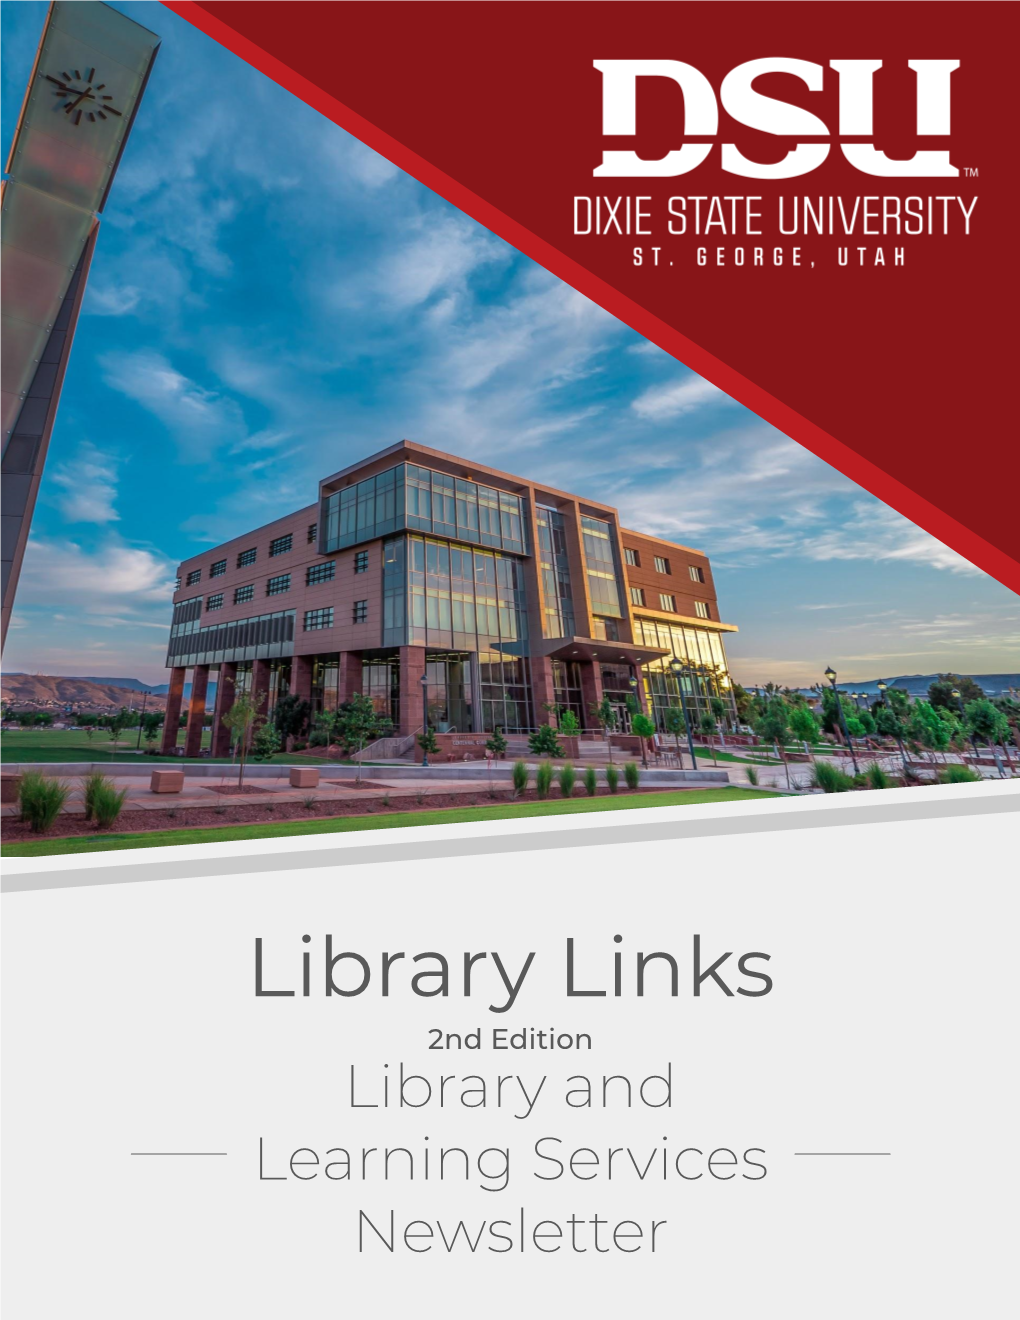 Library Links When Asked Why I Love Southern Utah, My Go-To Answer Is the Weather, of Course